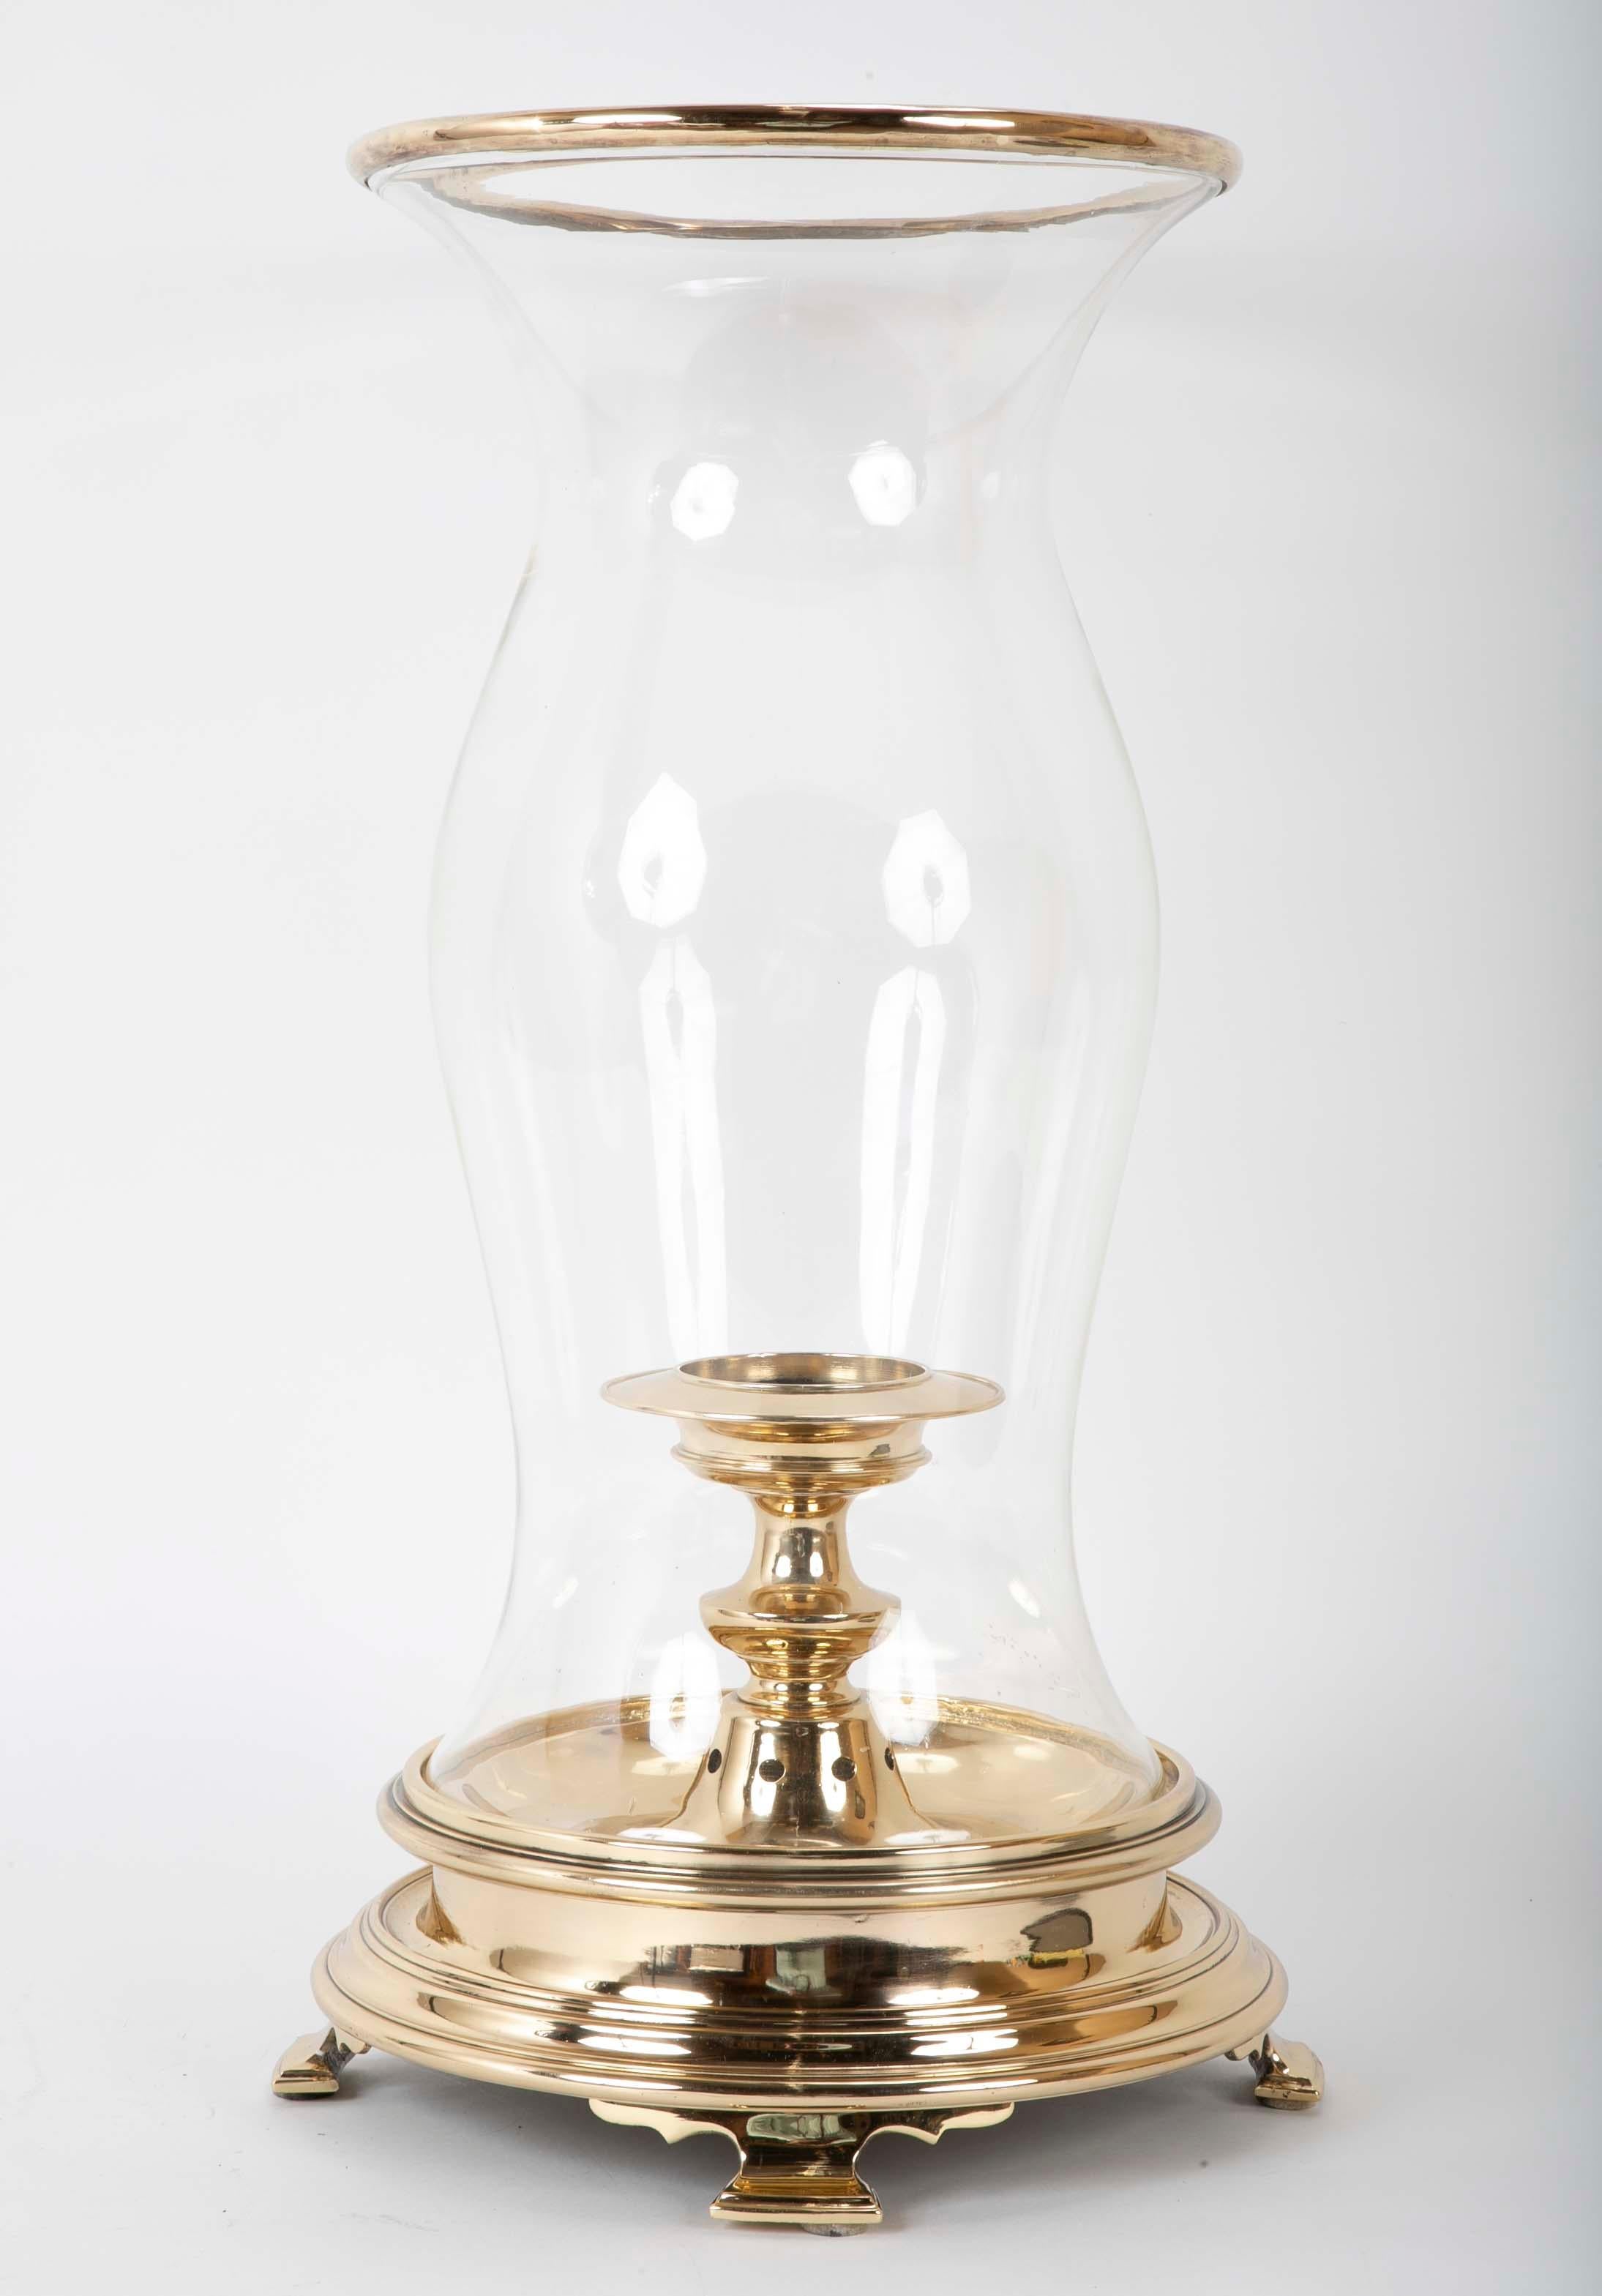 Very cool glass and brass large scale photophore, or hurricane lamp in the Regency style. The shaped glass shade with a brass rim on top over a heavy bras base, this will not blow over! Candle stand will accommodate a large candle.
Almost 2 feet